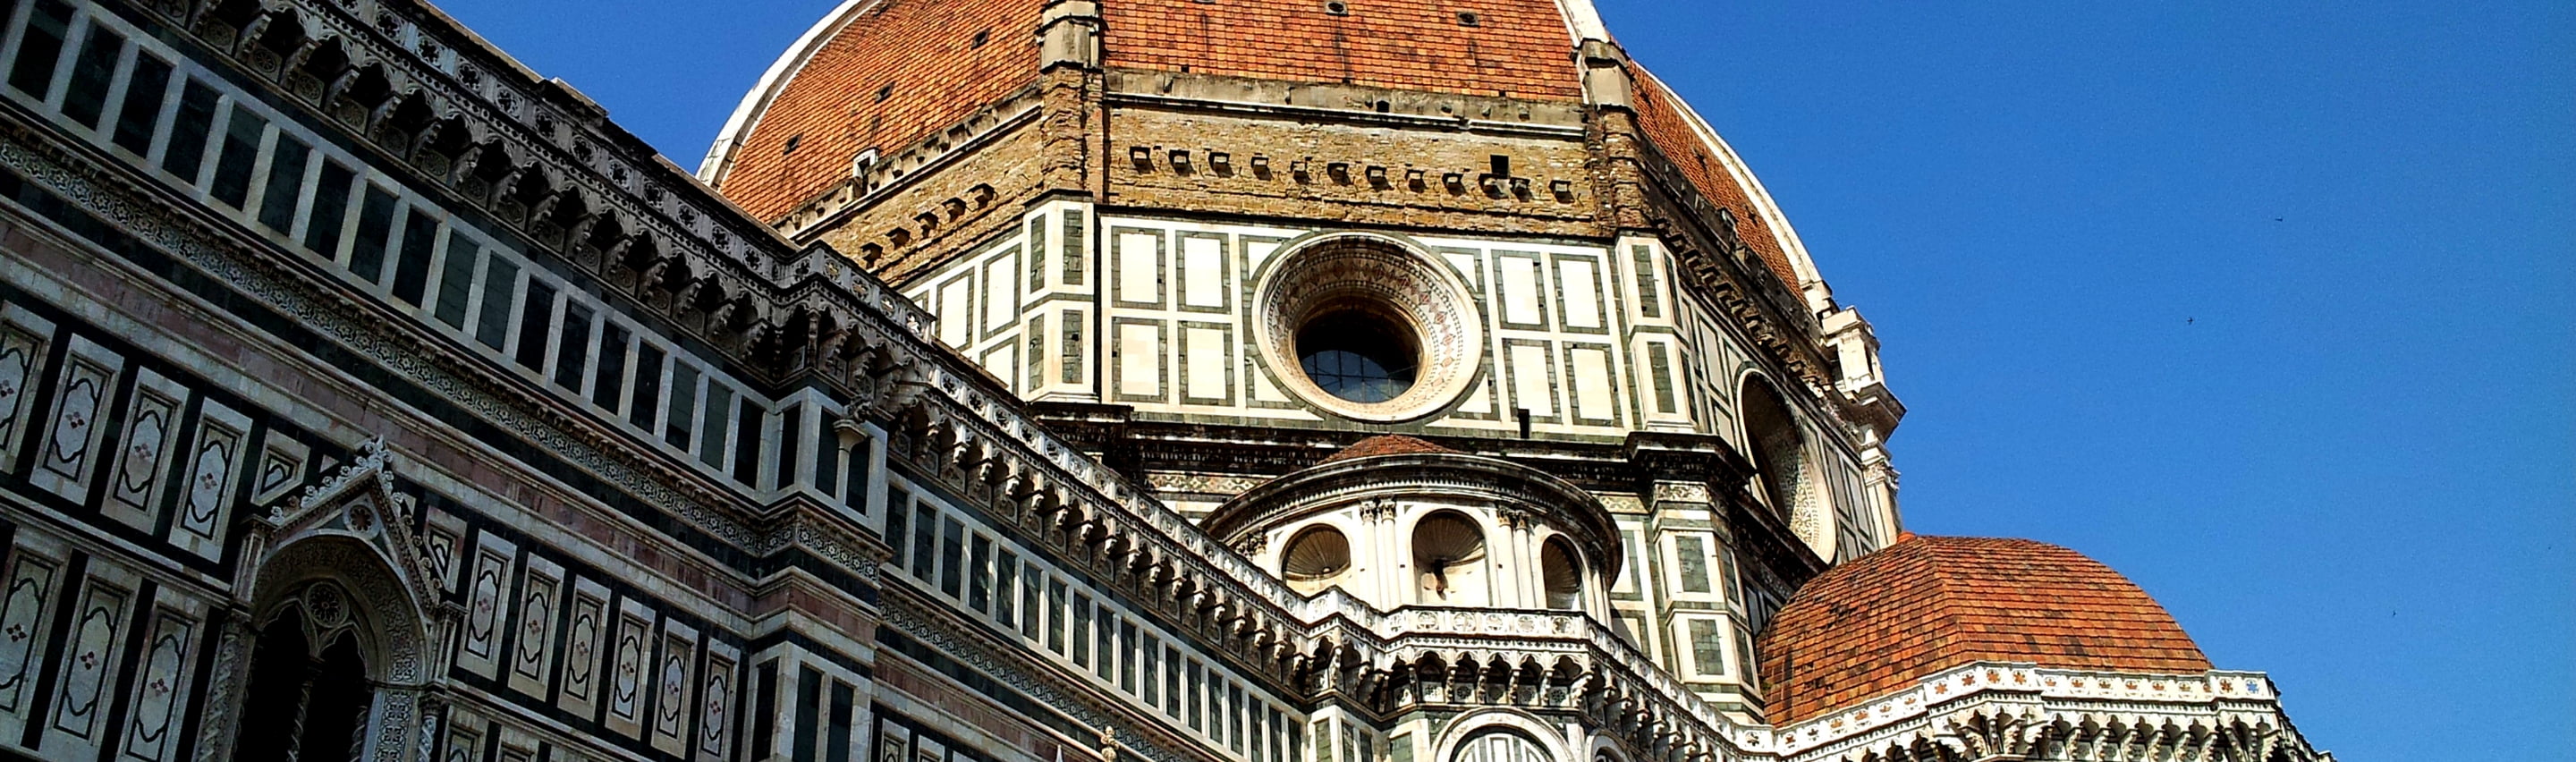 Florence Duomo Express Guided Tour Tickets - Dark Rome